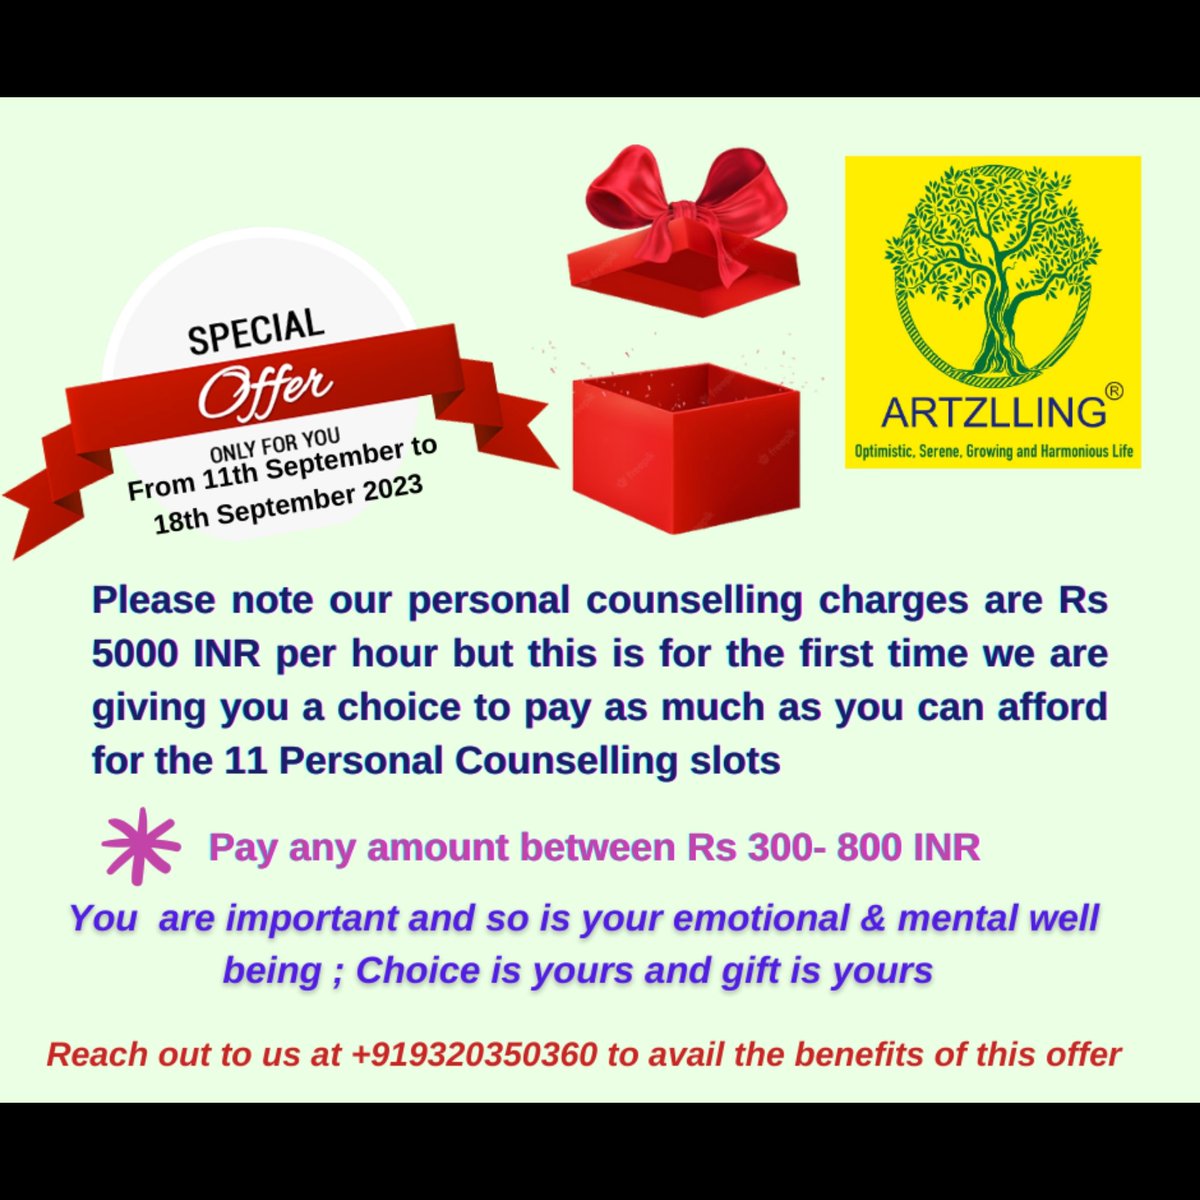 Its my birthday  today and we are launching  a new innovation today I have an exciting gift for all my well wishers across the globe 🌎 🎁❤️💫
Its my goal to make counselling accessible to more individuals so i am offering 11 'Pay as you can slots (FOR MORE DETAILS OF NEW LAUNCH)